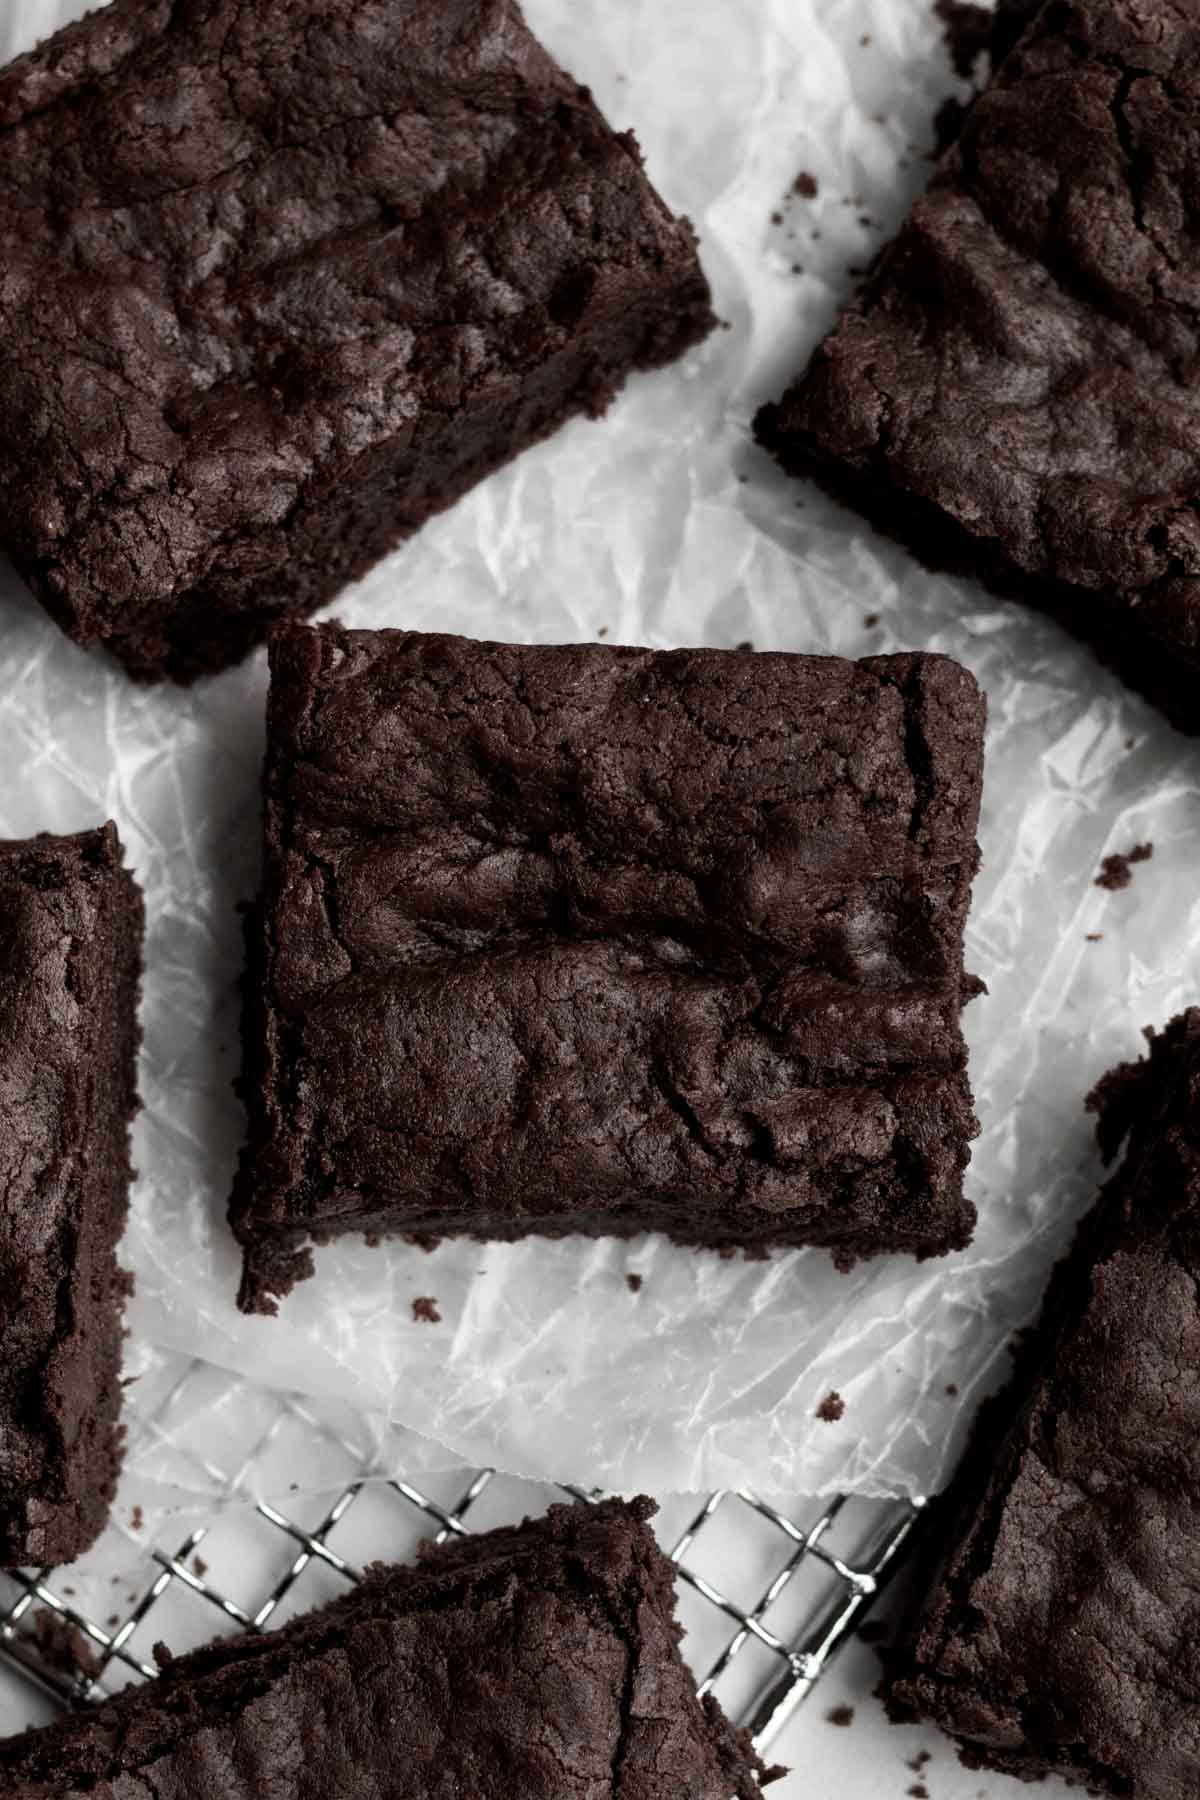 The crisp outer shell of chocolate cake holds bak the fudge interior of this brownie square.